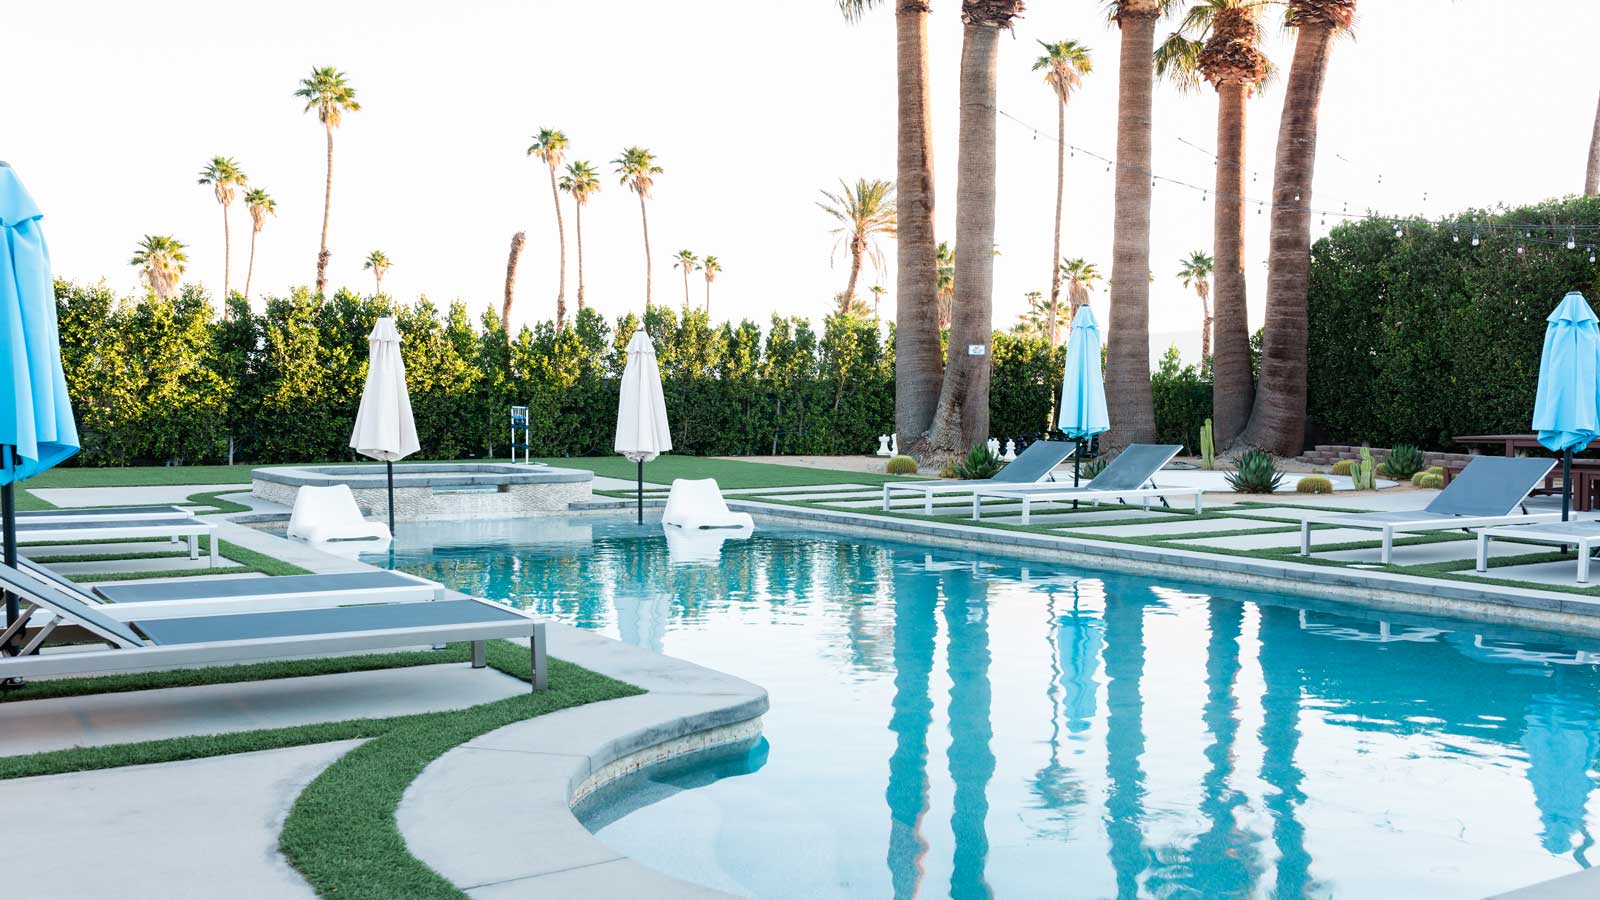 <p><span>200 W Arenas Rd, Palm Springs, CA 92262</span></p><p><span>We booked our romantic anniversary stay at the </span><a href="https://holidayhouseps.com/" rel="nofollow noopener"><span>Holiday House</span></a><span>. This blue and white-painted adults-only boutique hotel is in the heart of Palm Springs and is absolute perfection for those who love artistry, luxury, and quiet. From the warm smiles of the staff and the fabulous pool and grounds to the exceptional rooms with the highest quality bedding, furniture, and amenities, this is where you want to stay. </span></p><p><span>Each day, we started with the most delicious, healthy breakfast served a la carte from the bar/lounge area. Guests can choose from fresh fruit, yogurt and chia pudding, bagels and lox, cereals, toasts, hard-boiled eggs, and so much more. Their lunch and dinner menus comprised a more focused selection of nutritious yet fun choices, such as a bucket of veggies, grilled artichokes, and lobster rolls.</span></p><p><span>Guests can rent bicycles to explore the town, play bocce ball, or soak up the sun while lounging around the newly remodeled pool area. Remember to cool off with some ice cream from the retro cart that is available, too. </span></p>